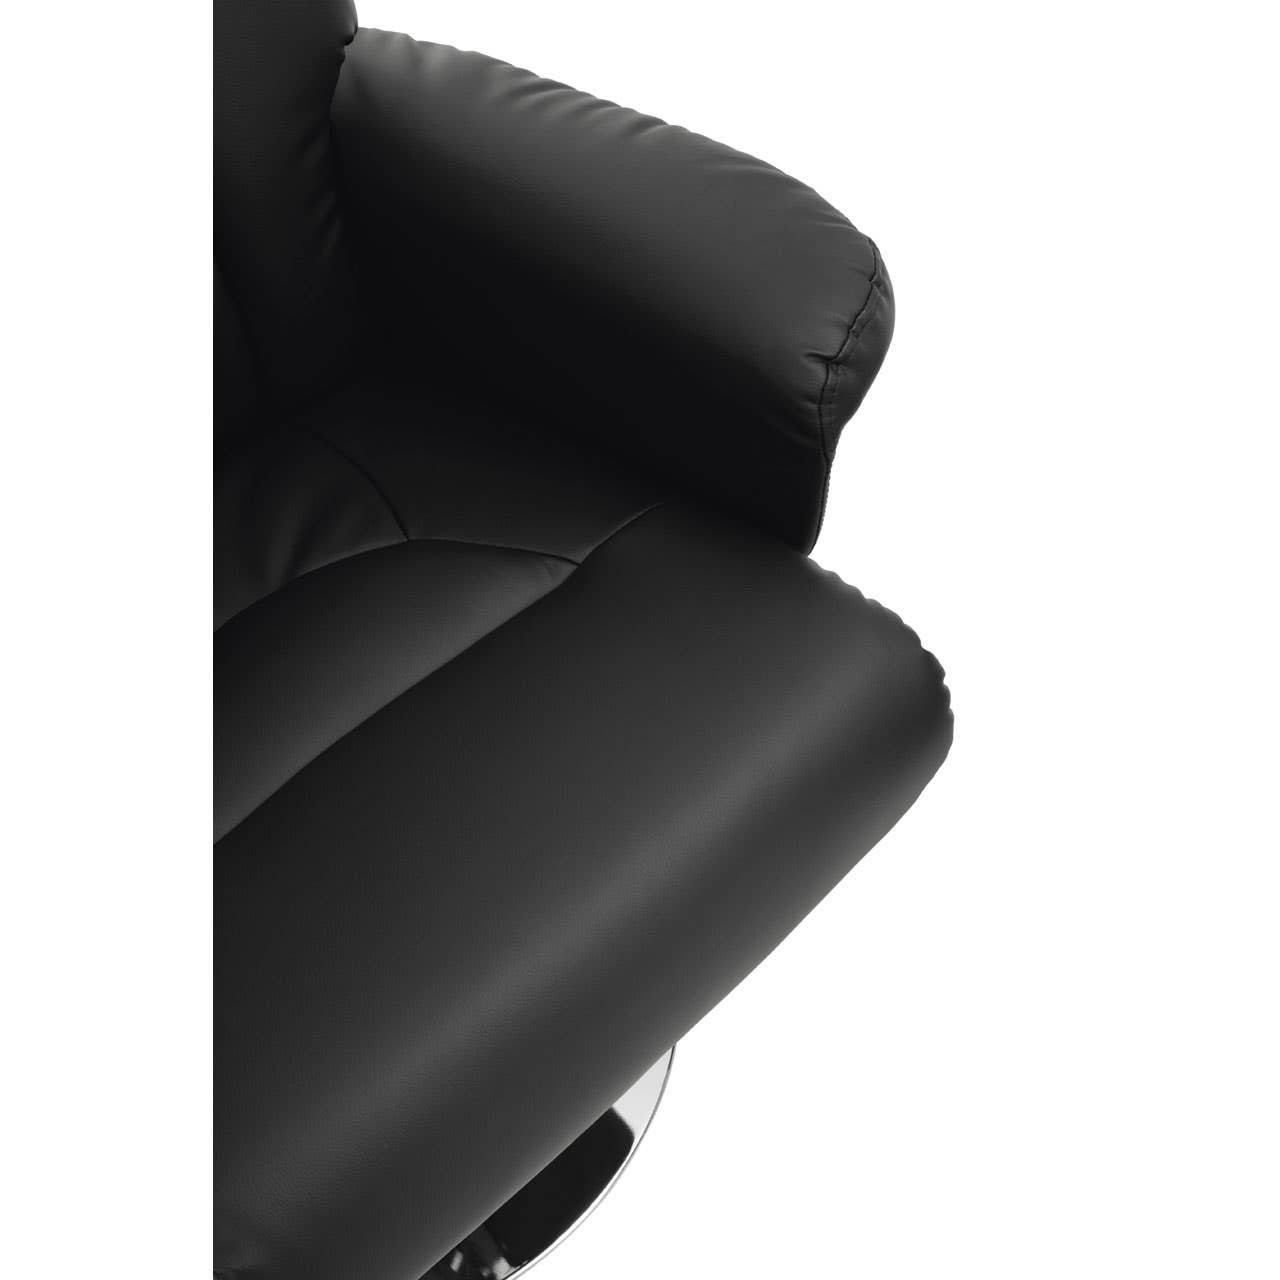 Noosa & Co. Living Denton Black Leather Effect Reclining Chair And Footstool House of Isabella UK